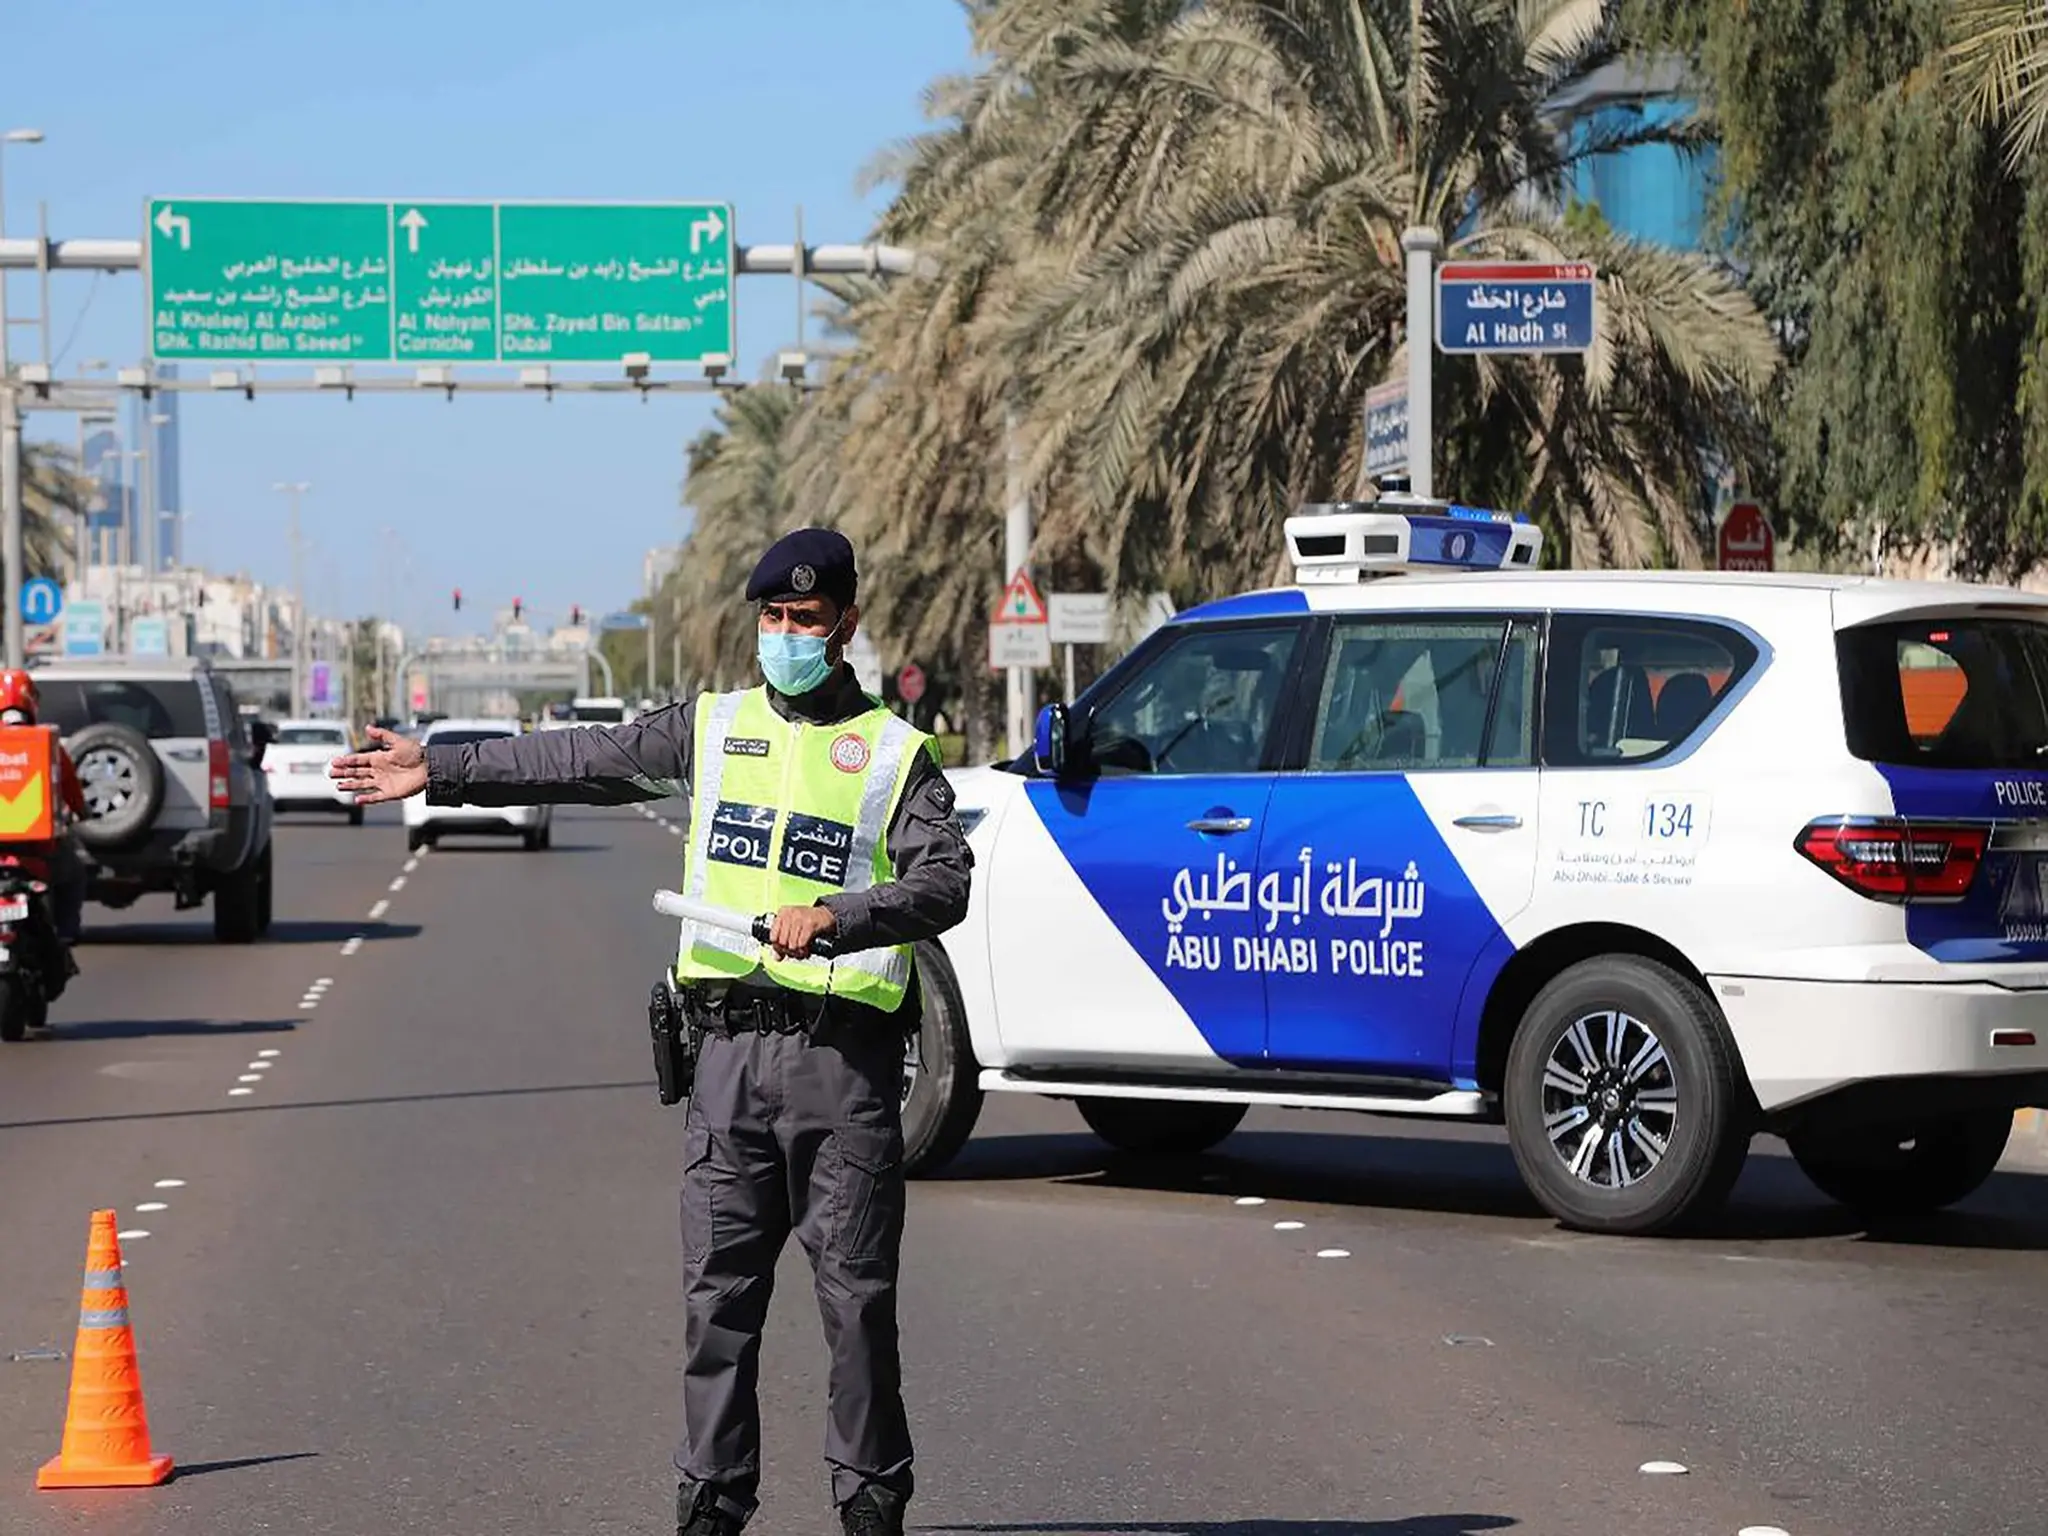 An important statement from the Abu Dhabi Police to all drivers